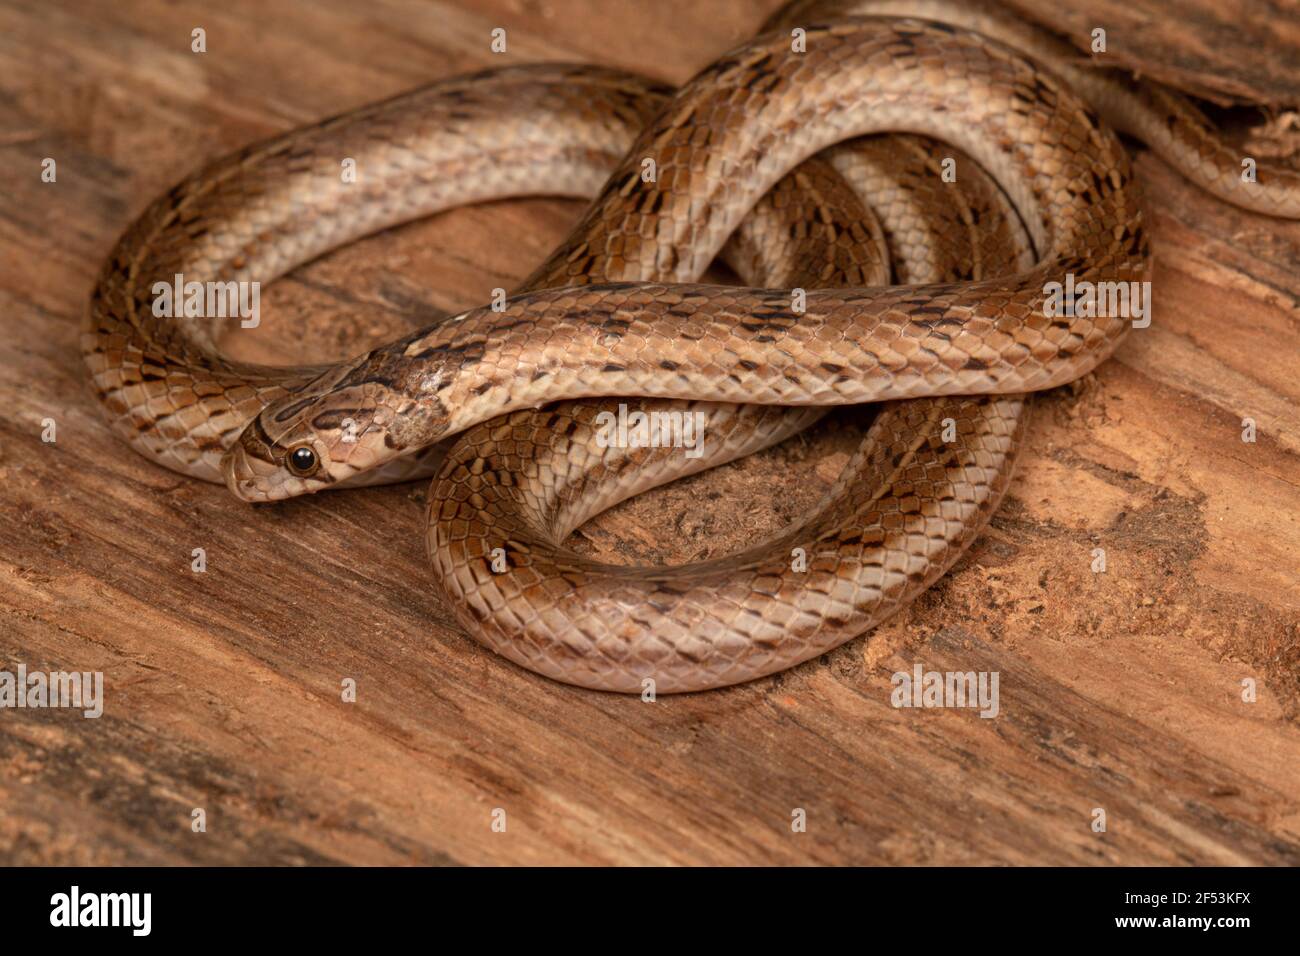 Streaked Kukri Snake, Oligodon taeniolatus is a species of nonvenomous snake found in Asia. Also known as the Variegated Kukri or the Russell's Kukri. Stock Photo